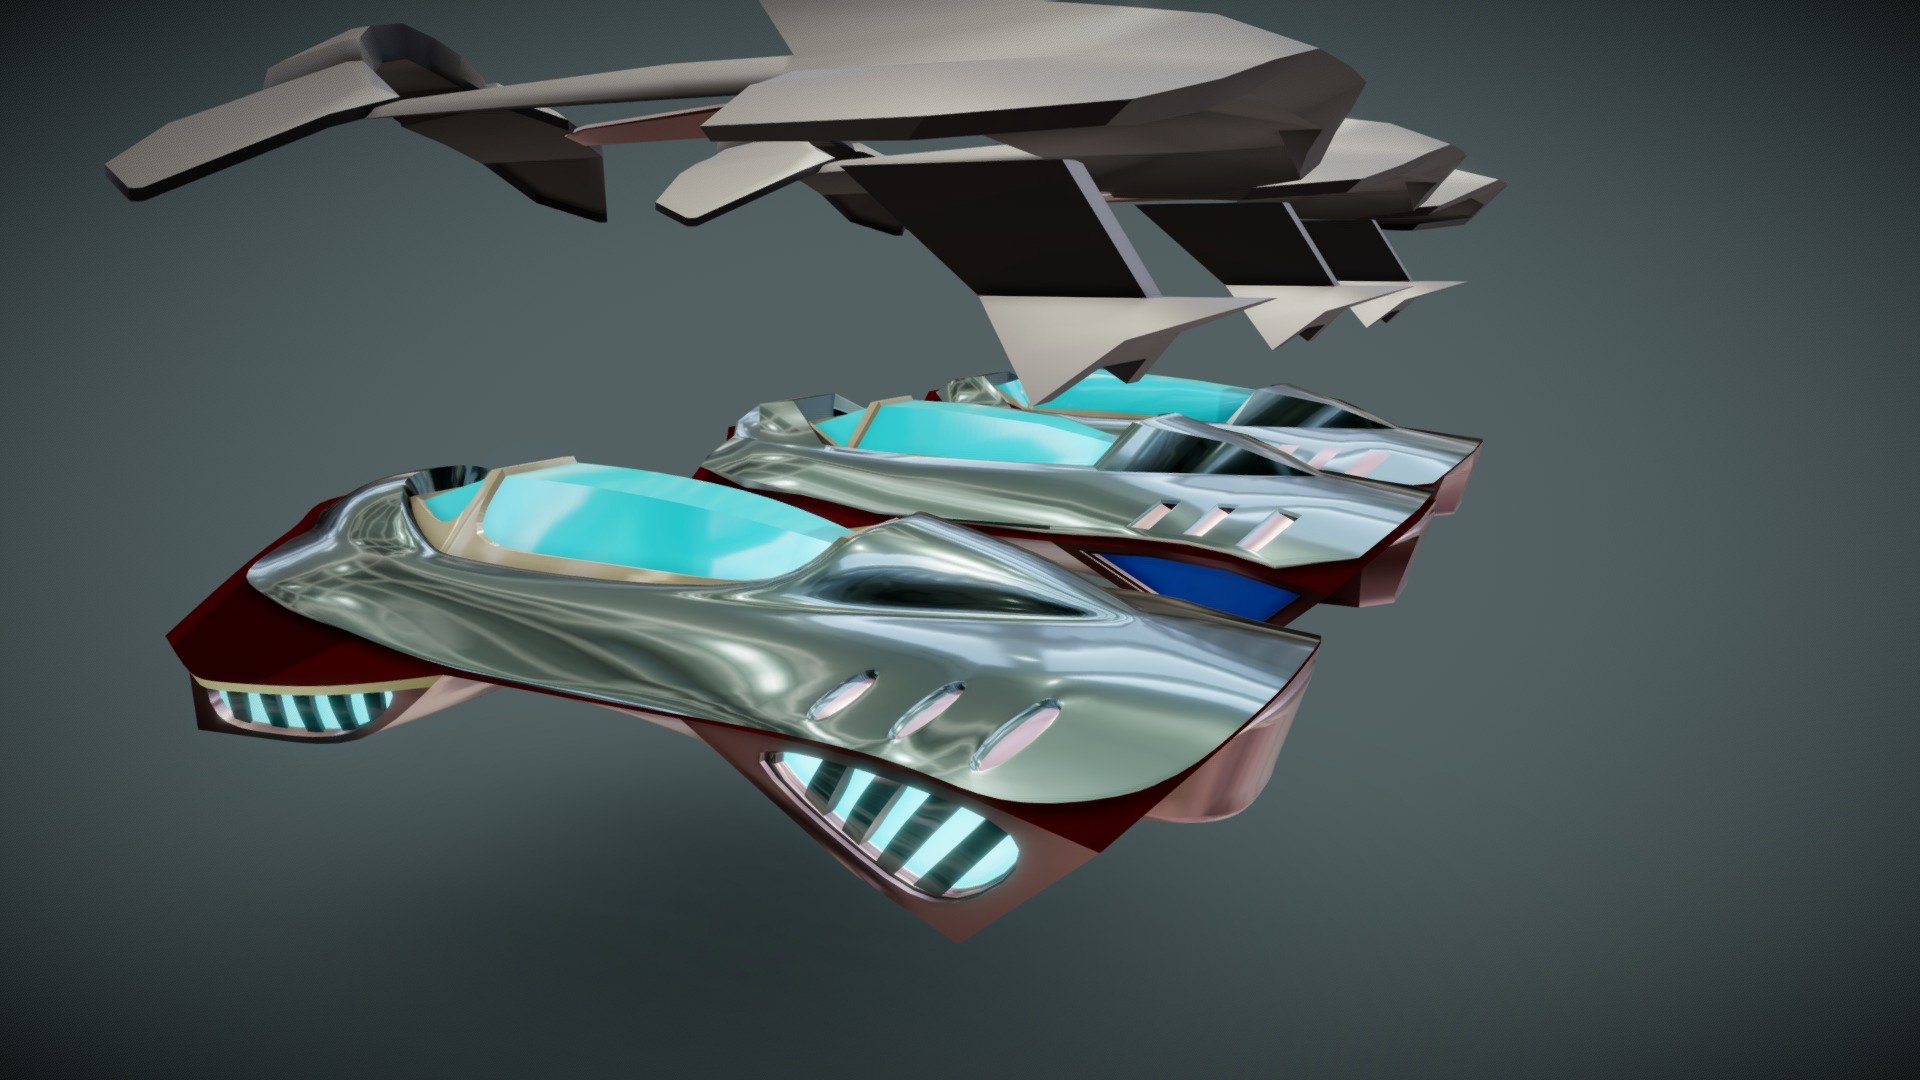 Simplistic Flying Vehicle 14

additional fiules: Blender scene with all model versions. Low-poly to high poly workflow 3d model